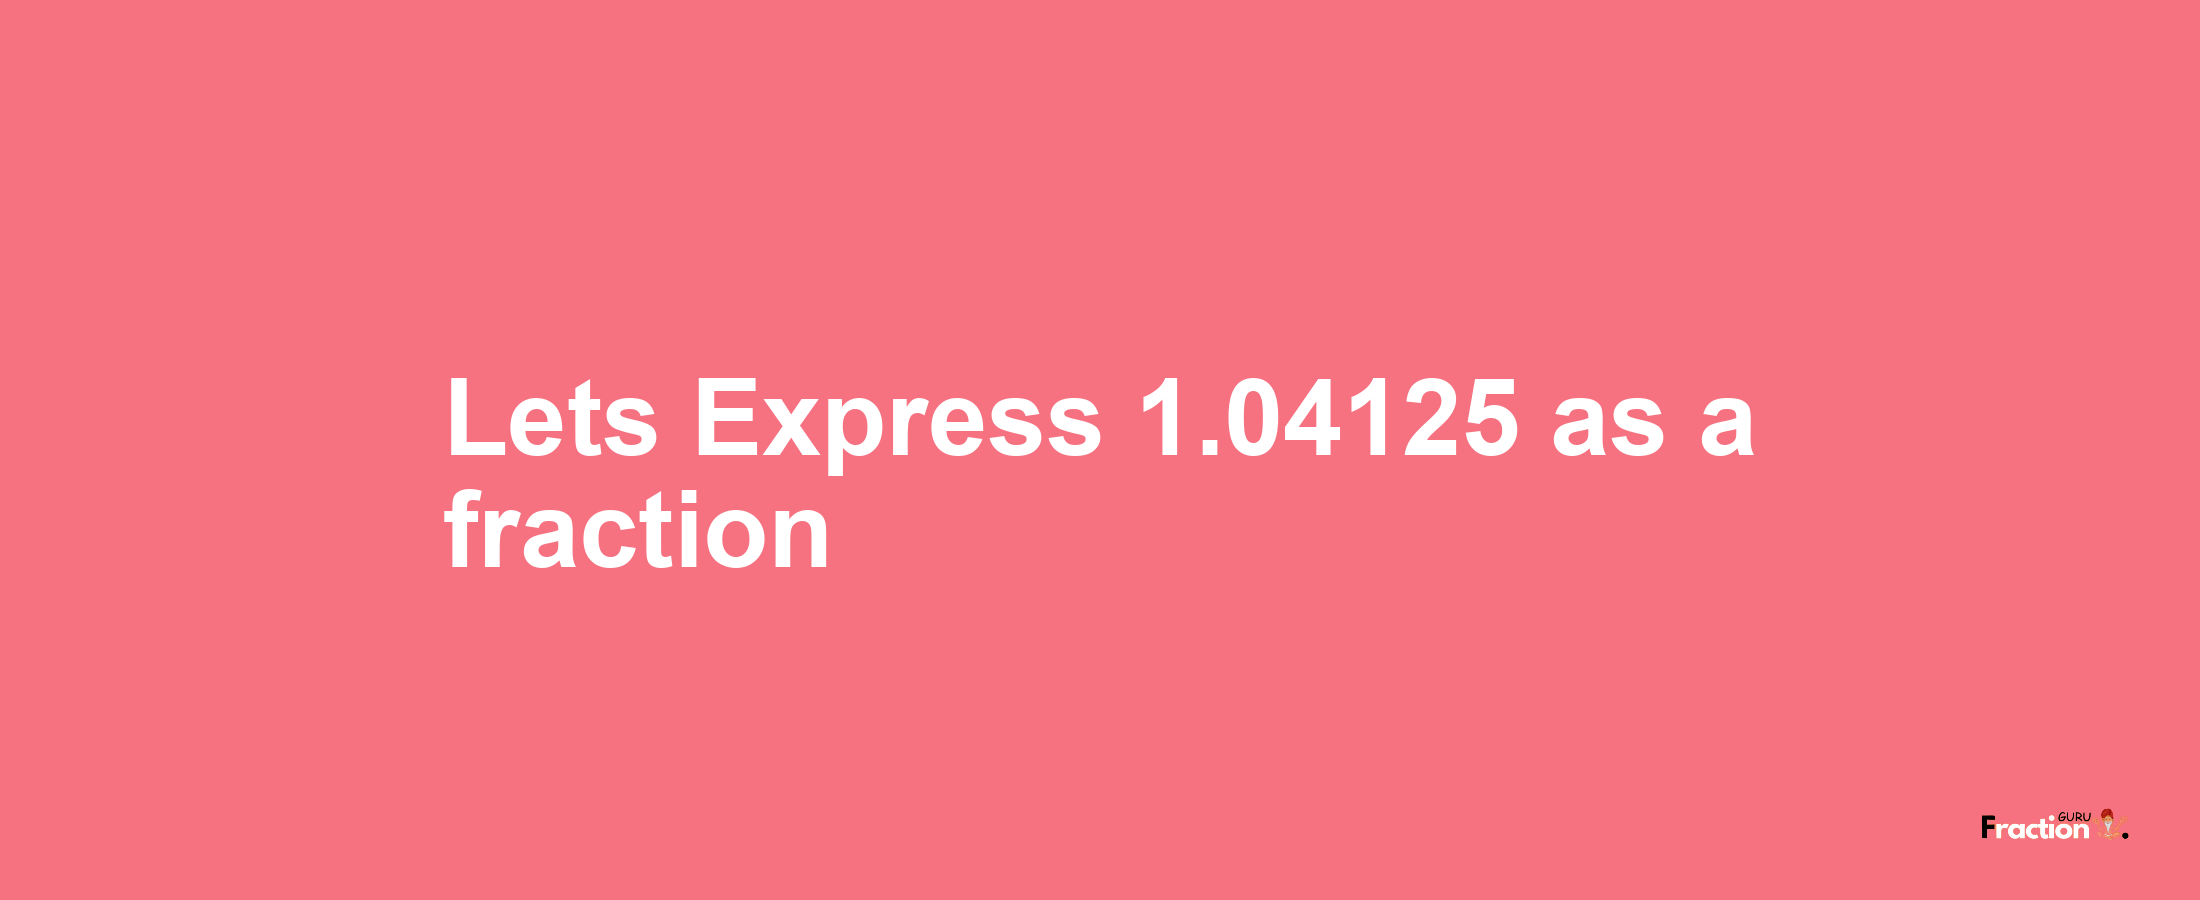 Lets Express 1.04125 as afraction